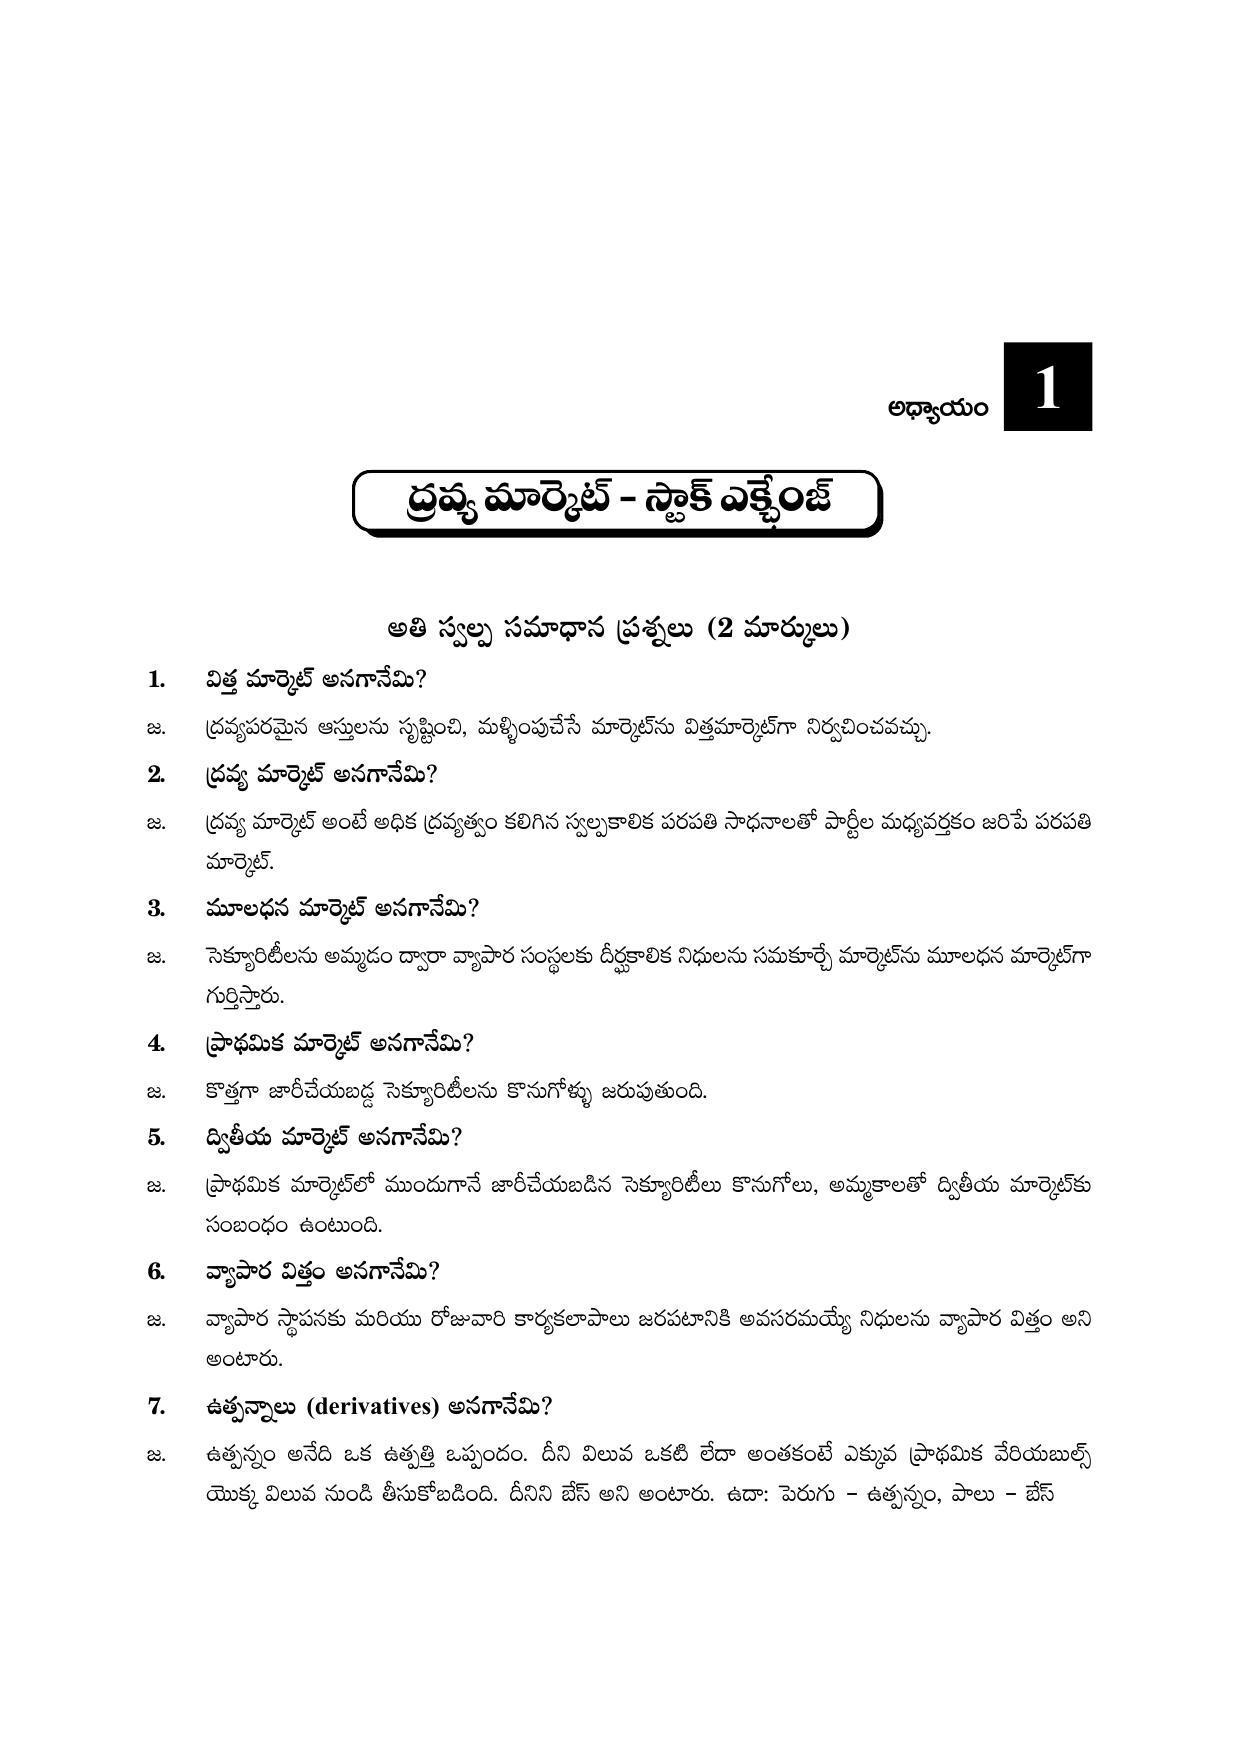 TS SCERT Inter 2nd Year Commerce &Accts II yr TM Path 1 (Telugu Medium) Text Book - Page 6